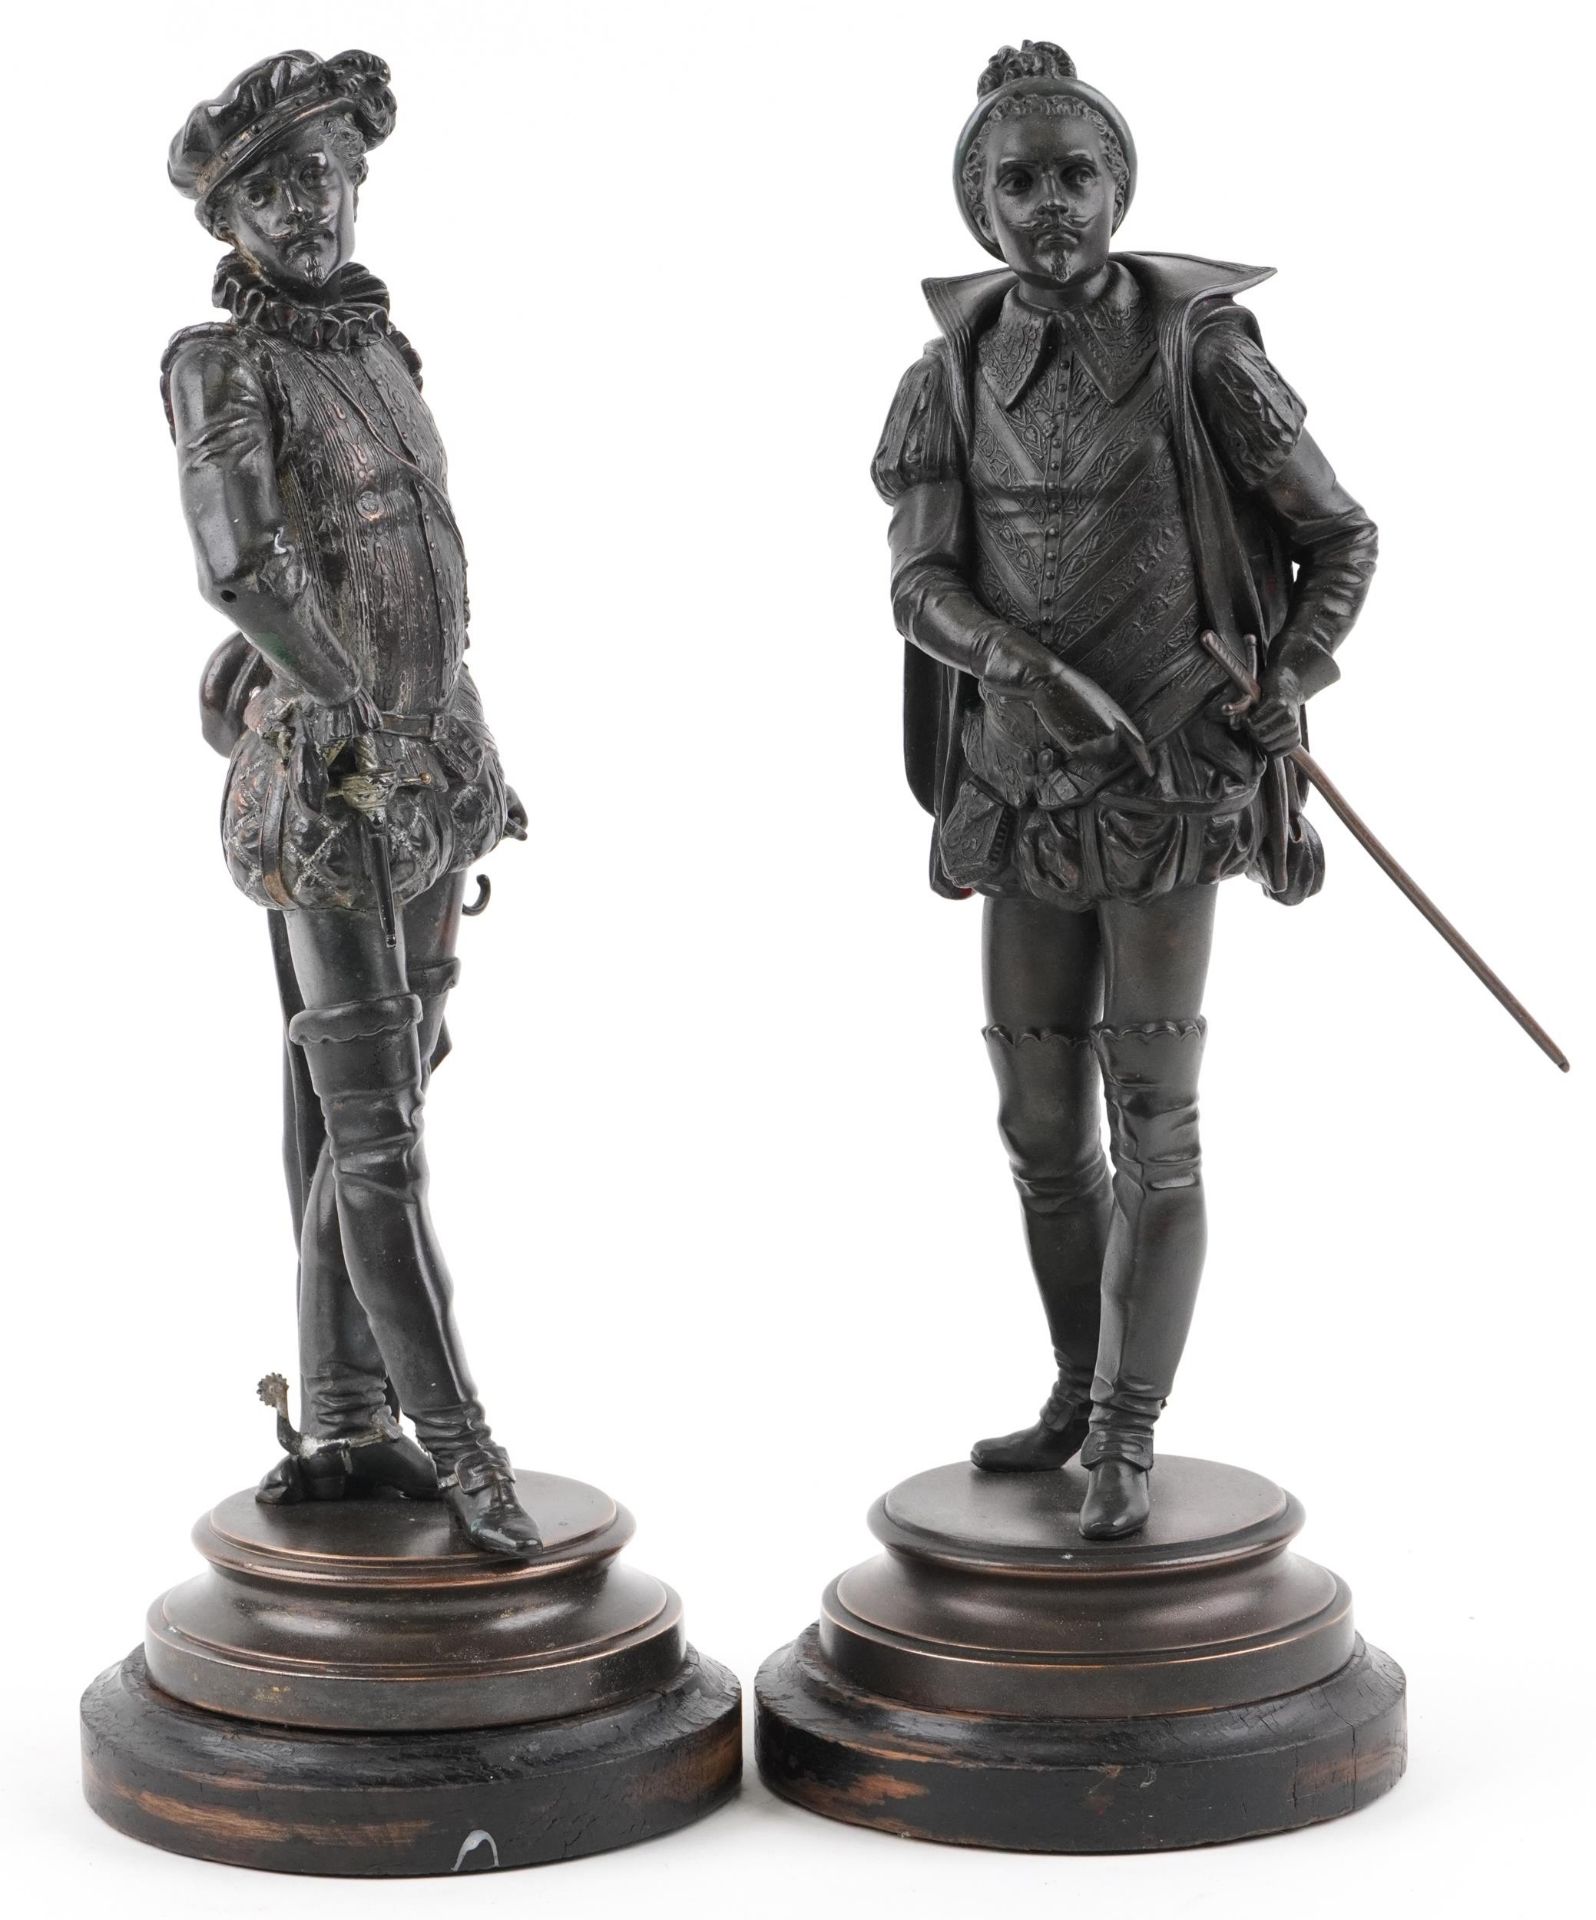 Pair of Victorian patinated spelter figures in 17th century dress raised on circular ebonised wooden